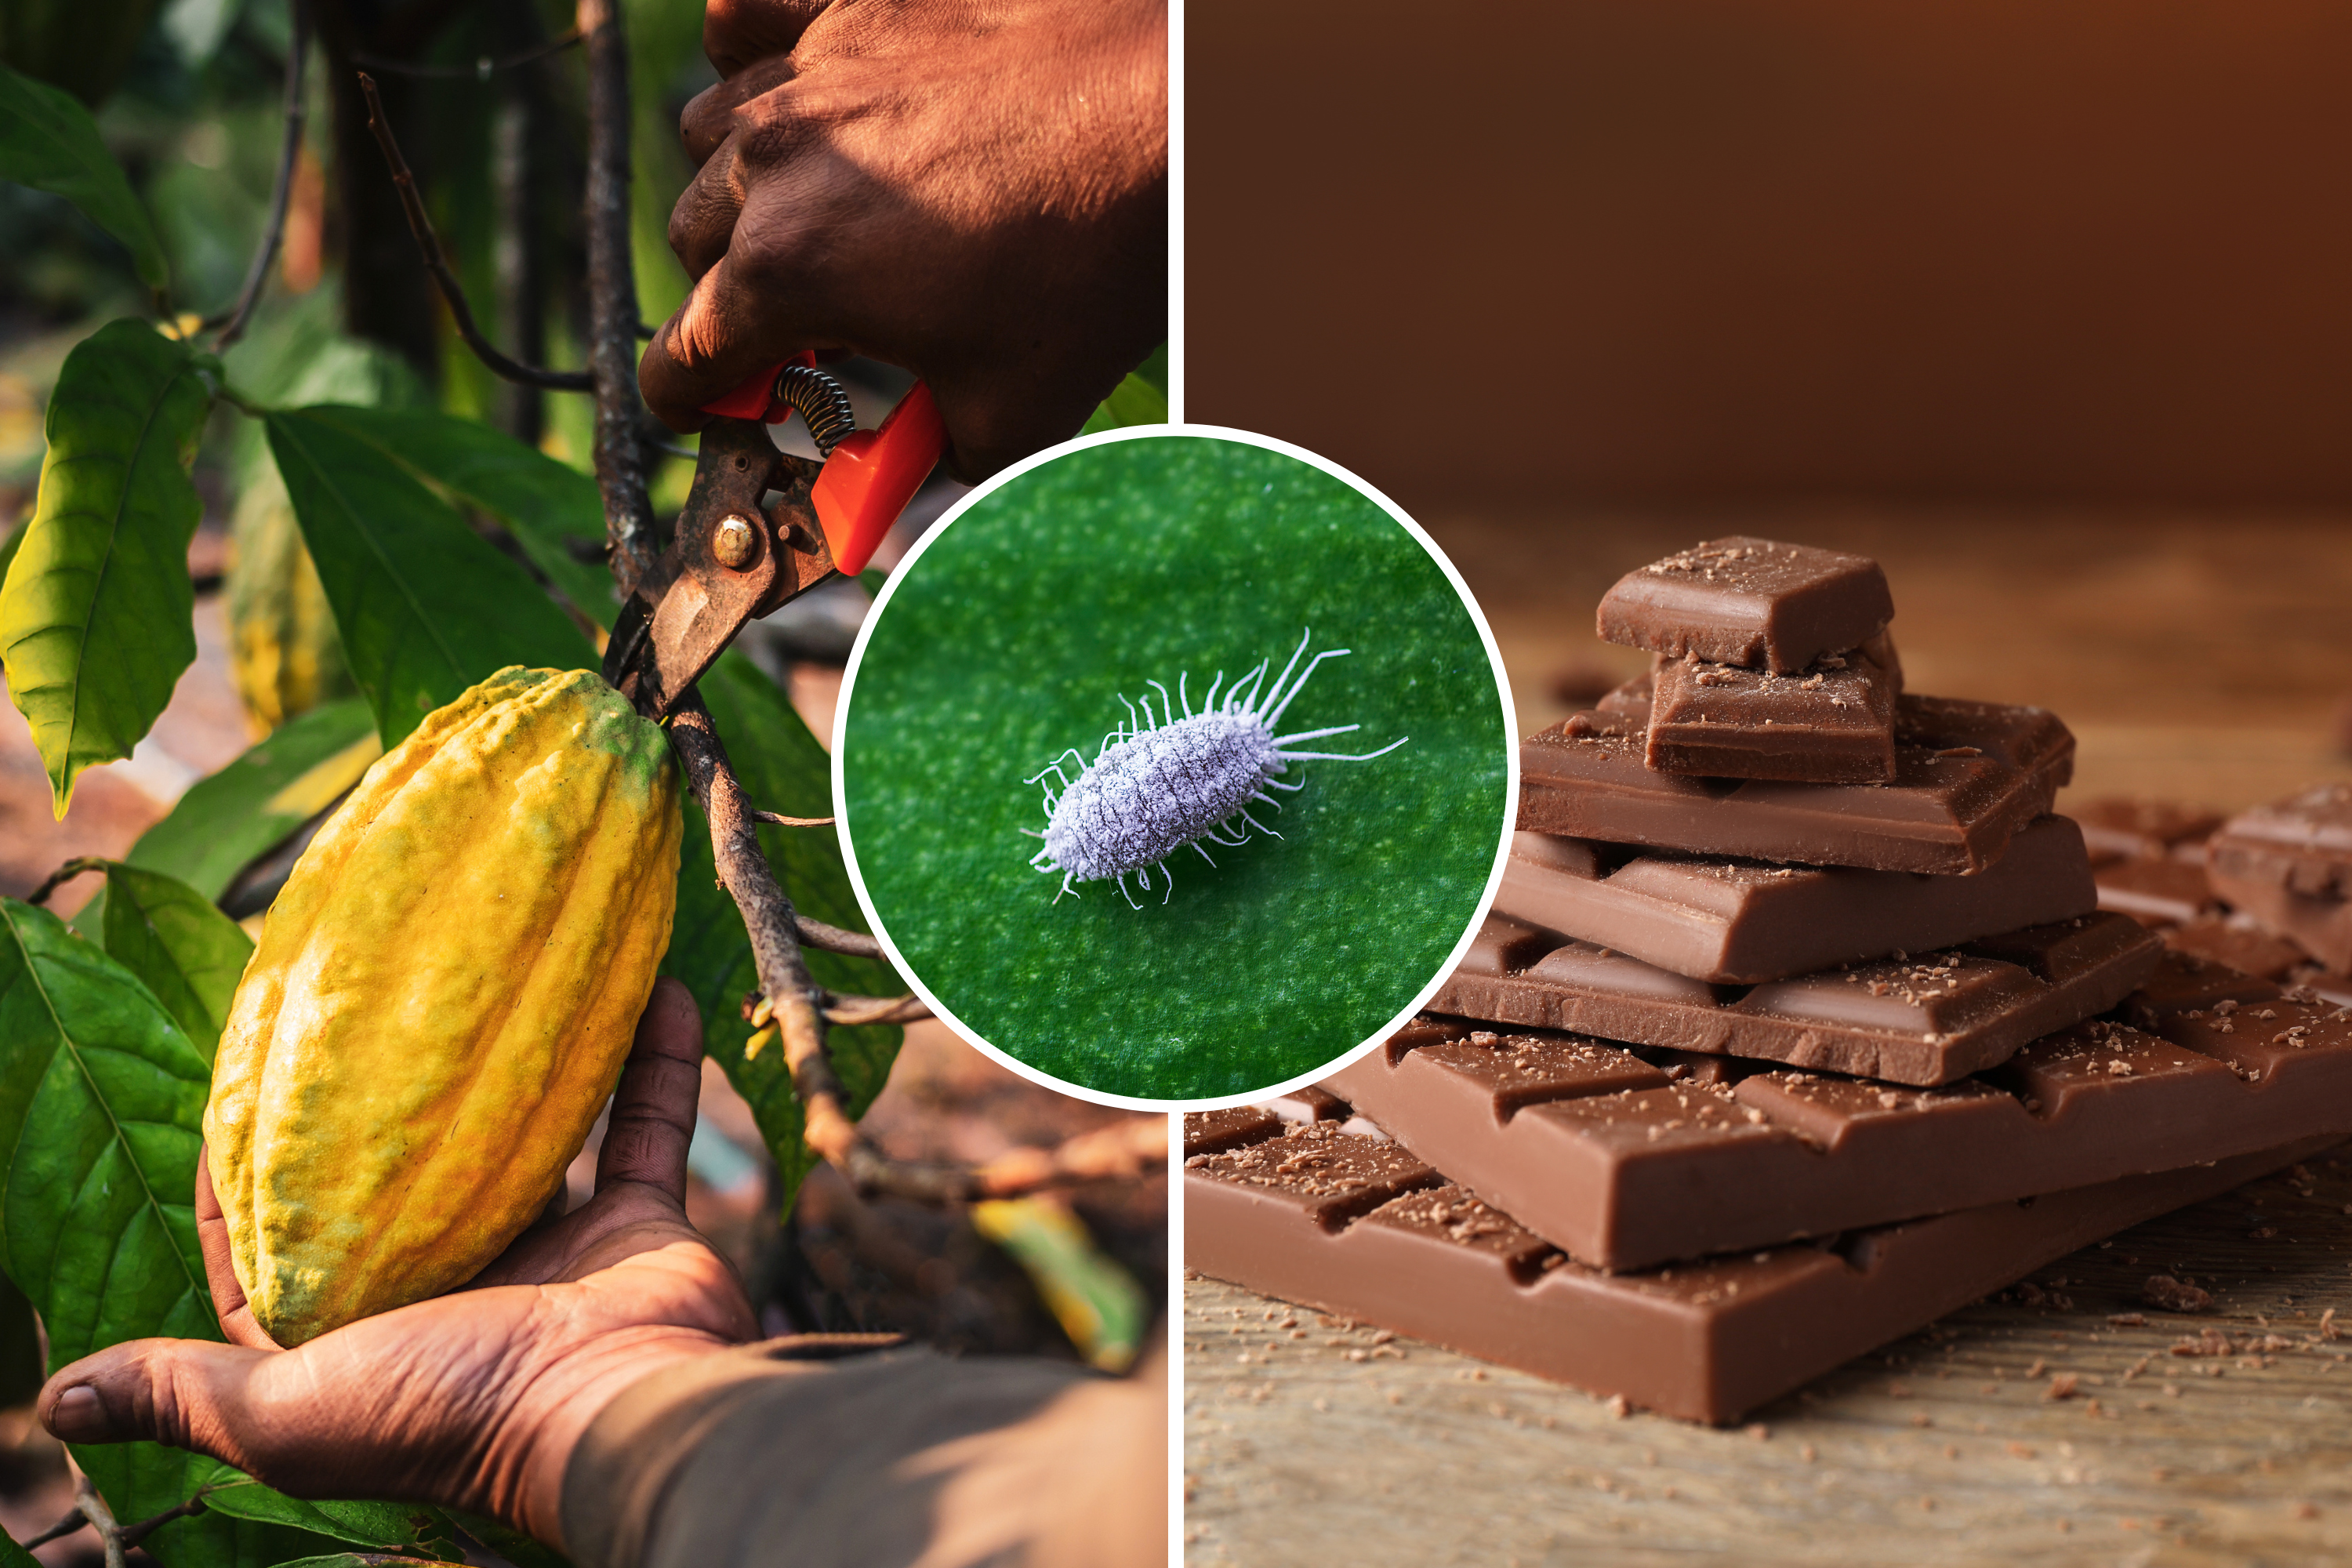 Chocolate warning as global supply under “real threat”